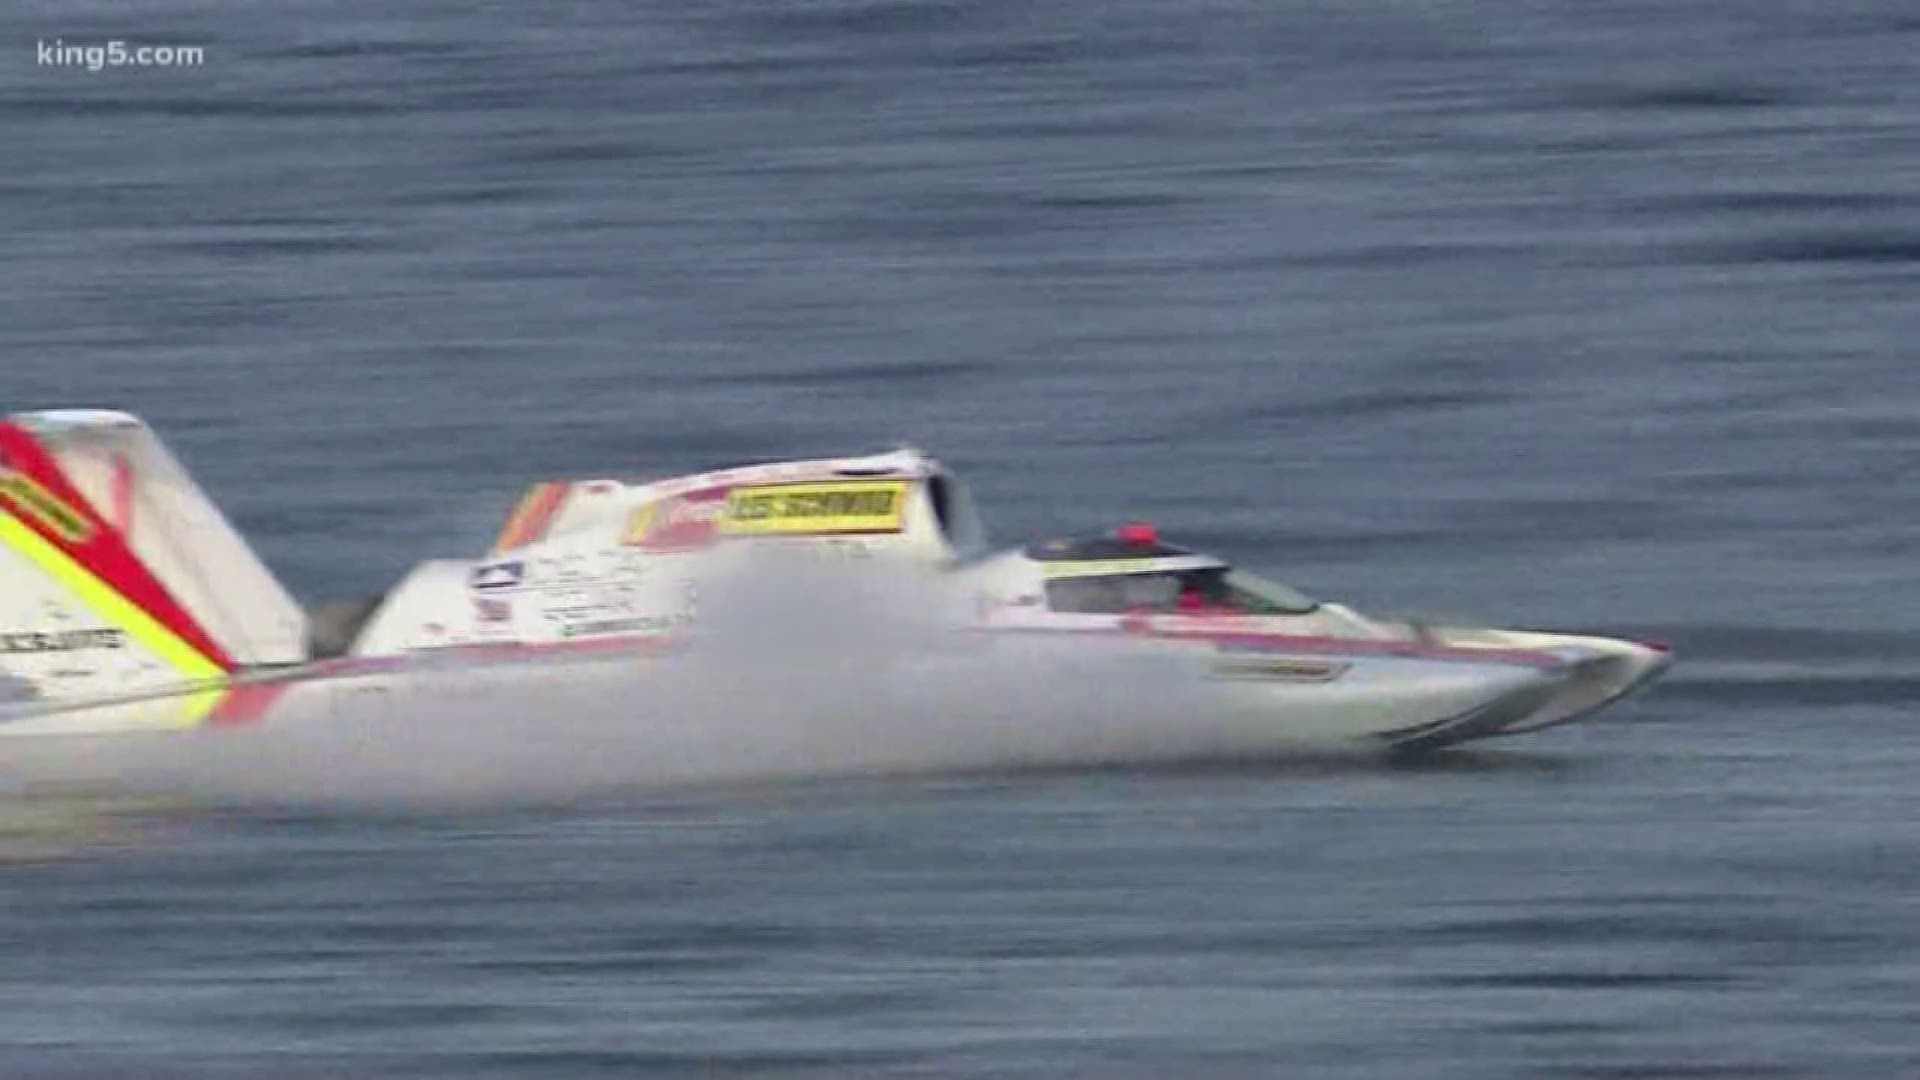 The racing boats can reach speeds over 200 mph and are a staple at Seattle's Seafair.